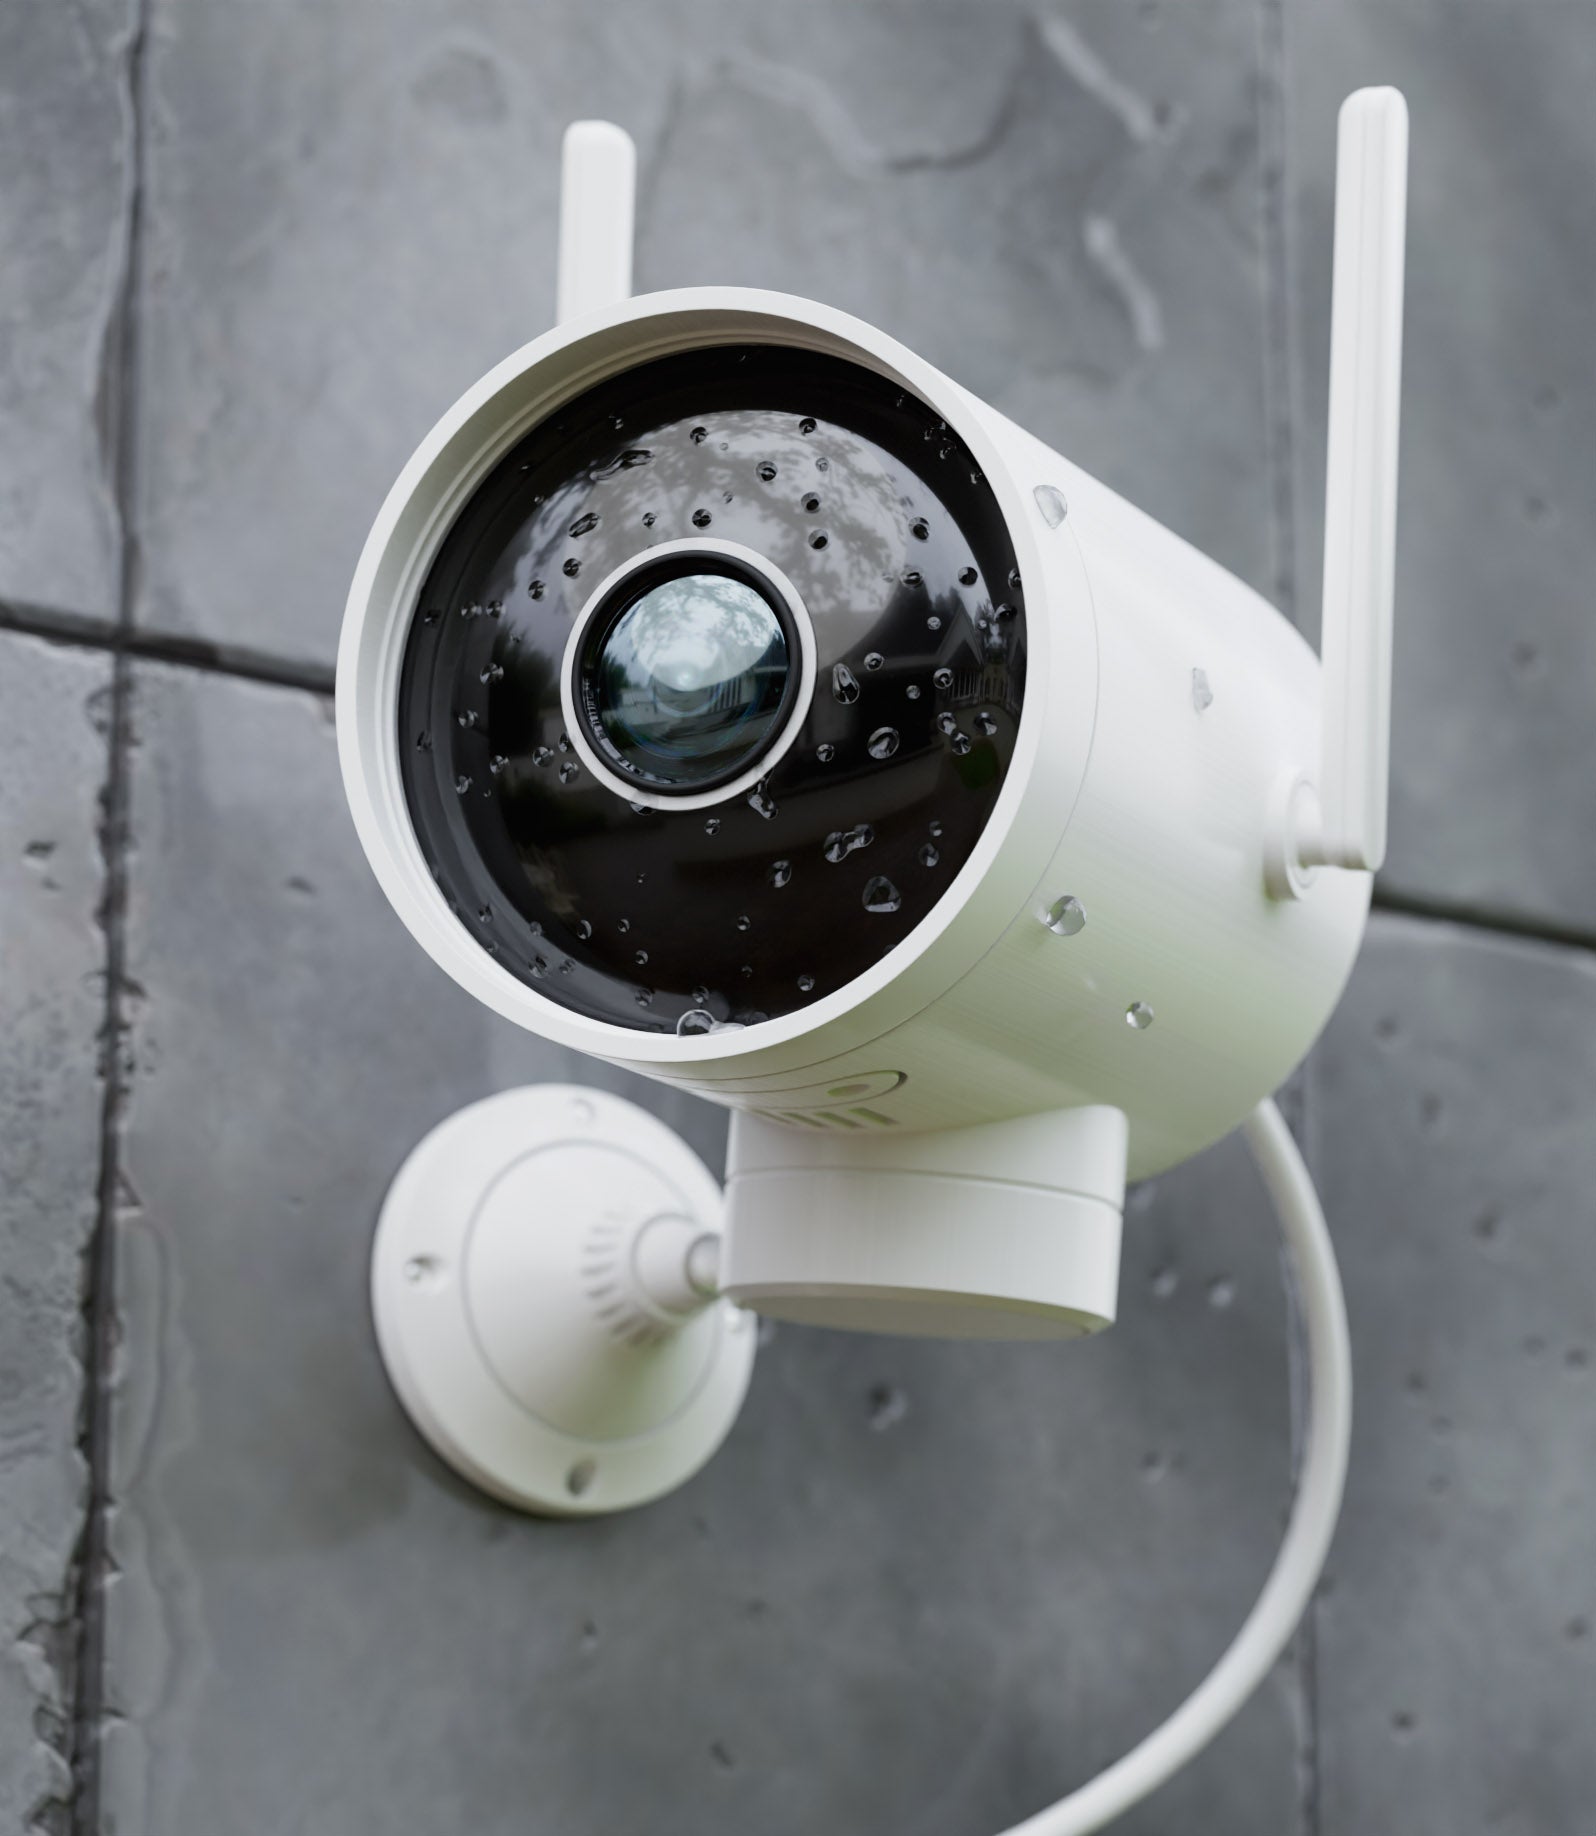 white-commecial-security-camera-bolted-on-grey-wall-tiles-outdoors-facing-left-with-its-black-lens-glowing-while-getting-hit-by-raindrops